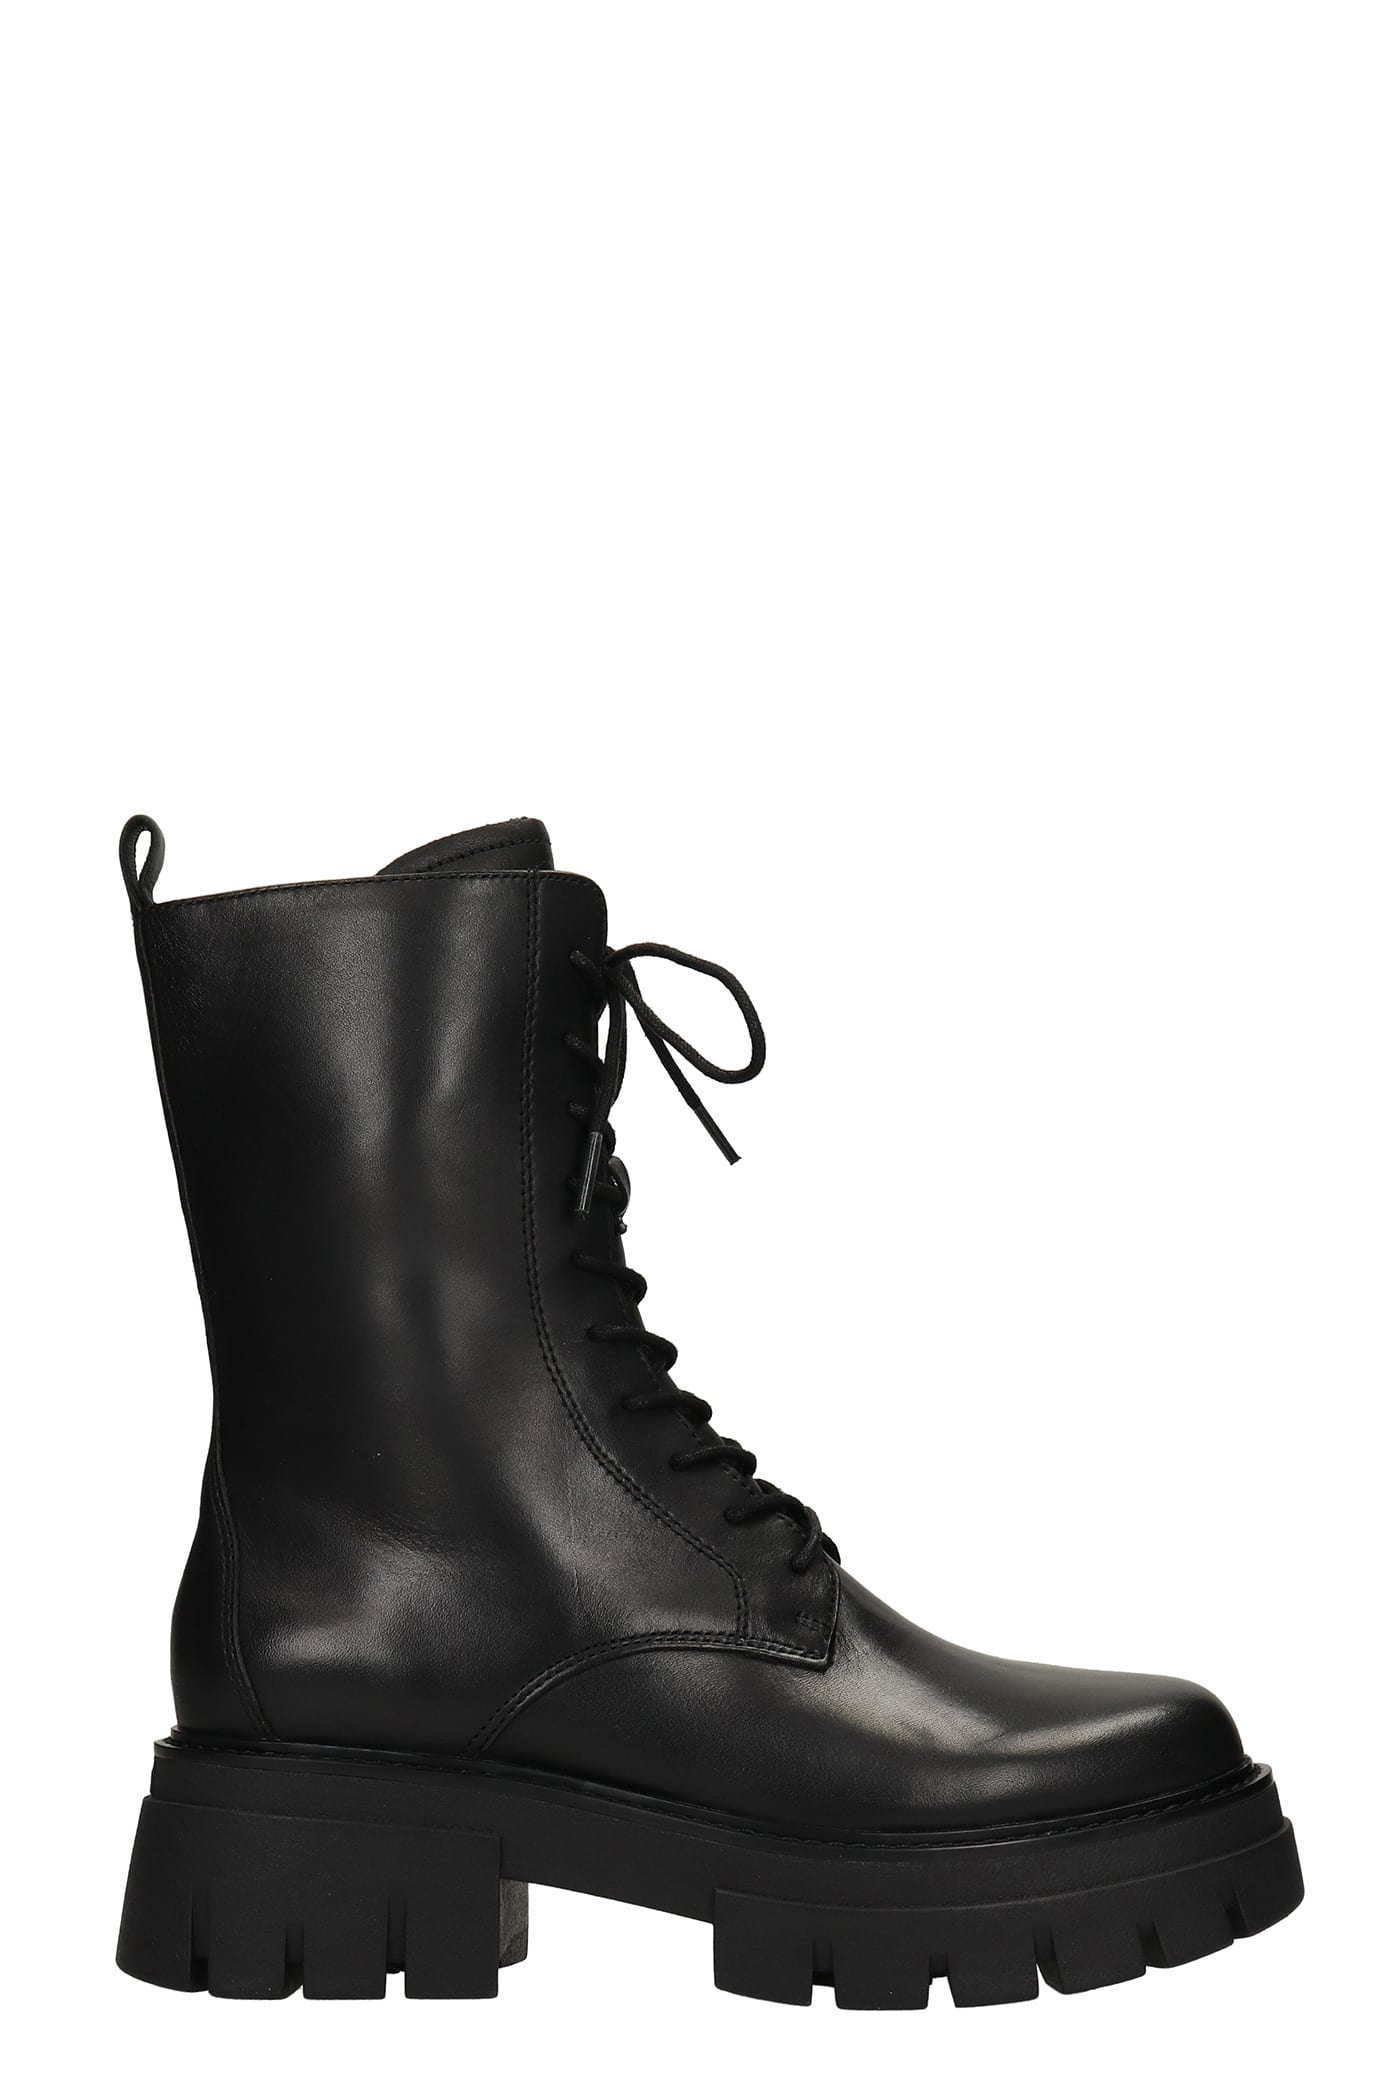 Ash Liam Combat Boots In Black Leather